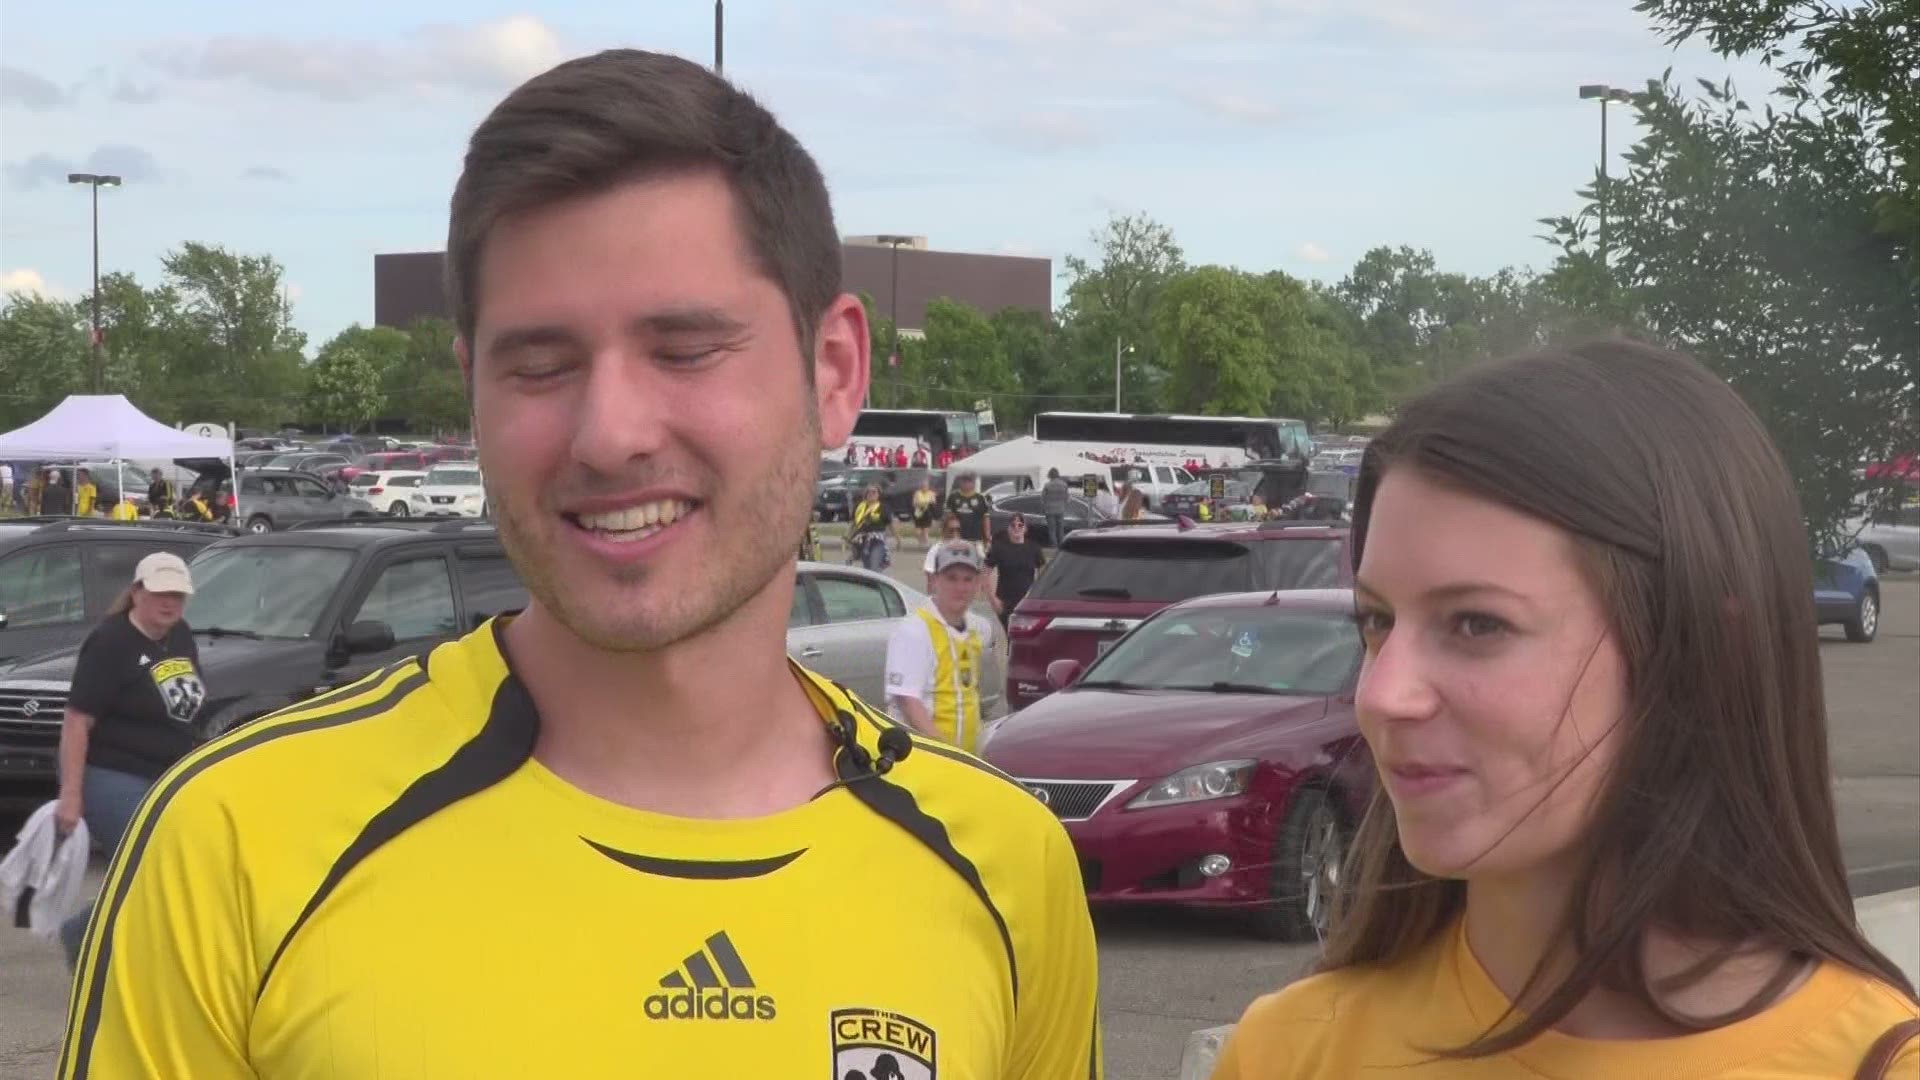 The couple found each other at a Crew game and decided to go to the last Crew game together.